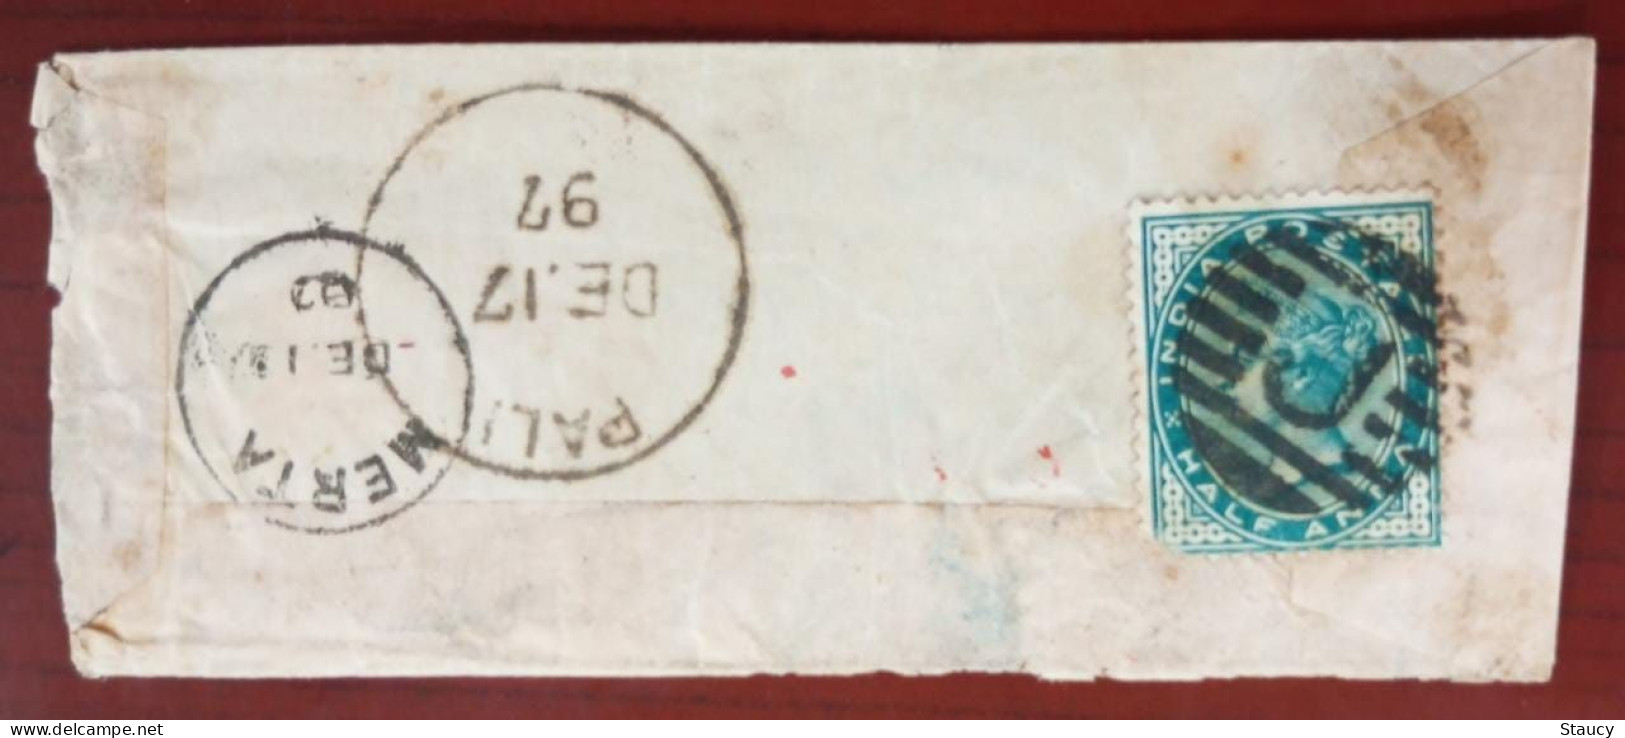 BRITISH INDIA 1897 QV 1/2a FRANKING On Jaypore State COVER, NICE CANC ON FRONT & BACK As Per Scan - Jaipur